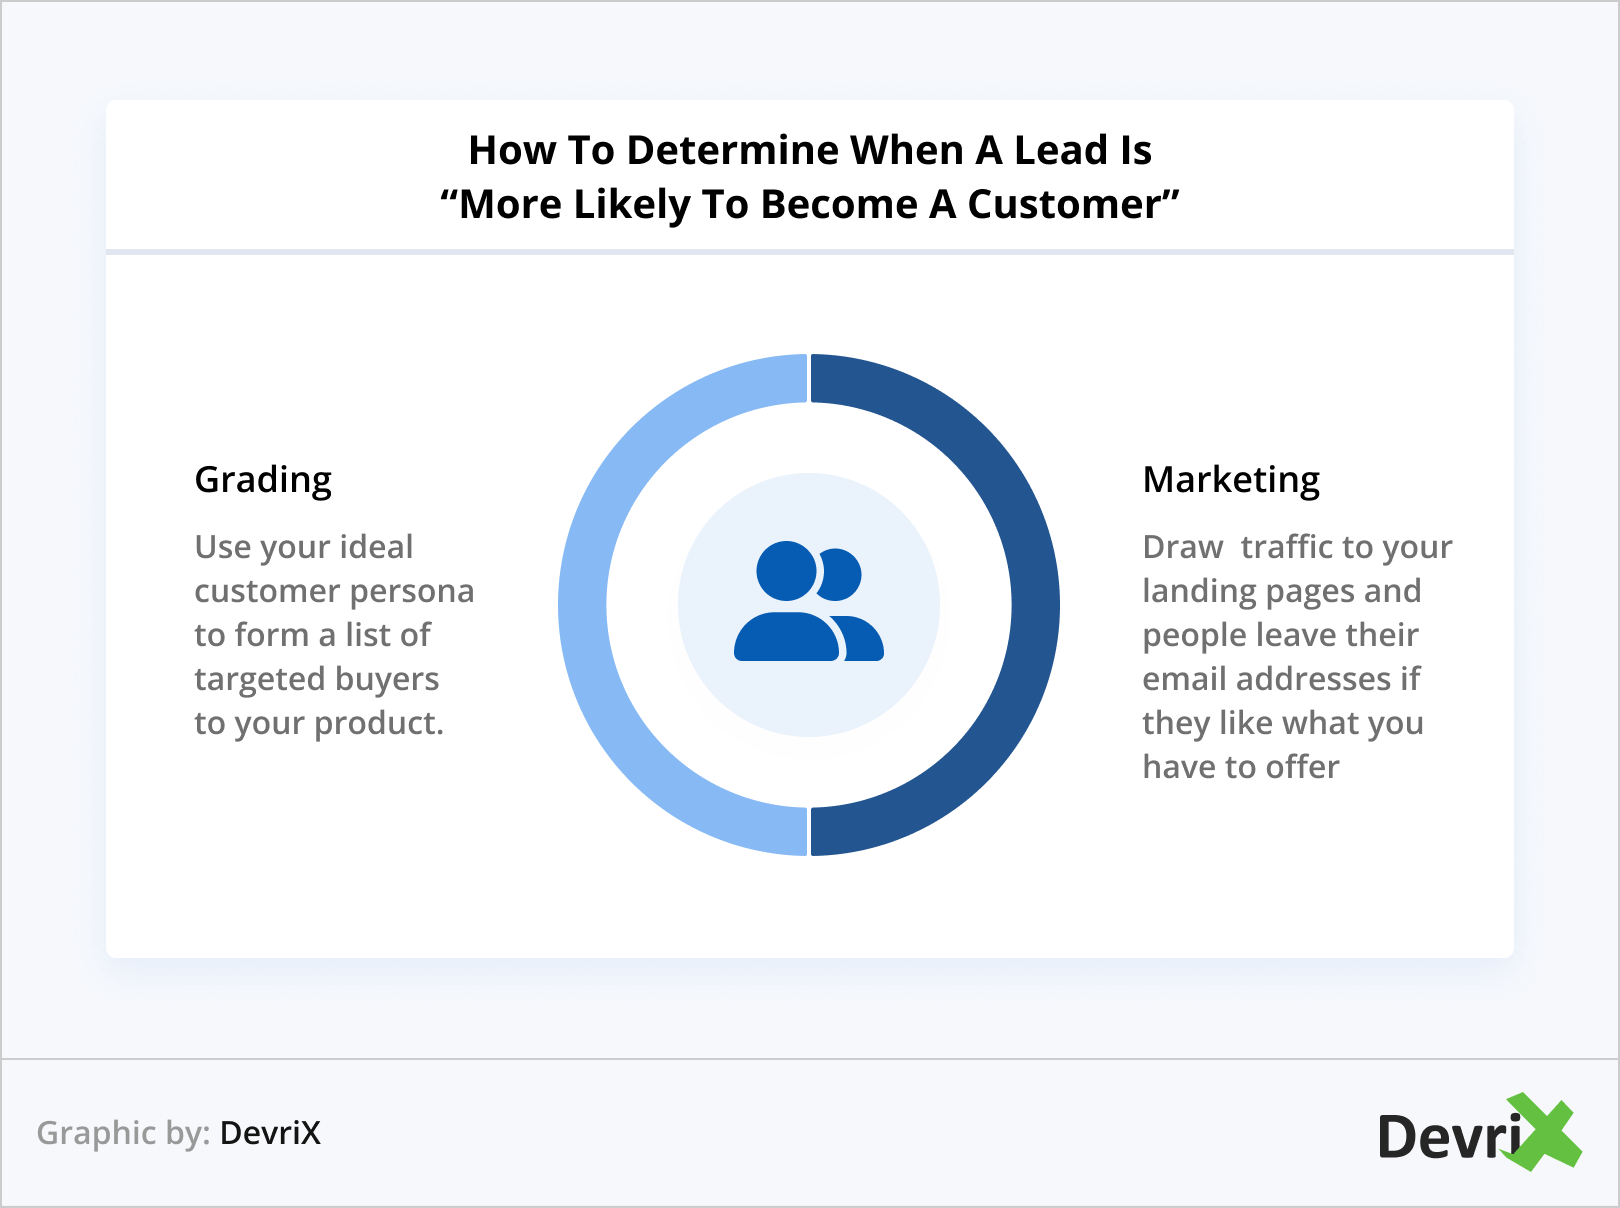 How To Determine When A Lead Is More Likely To Become A Customer